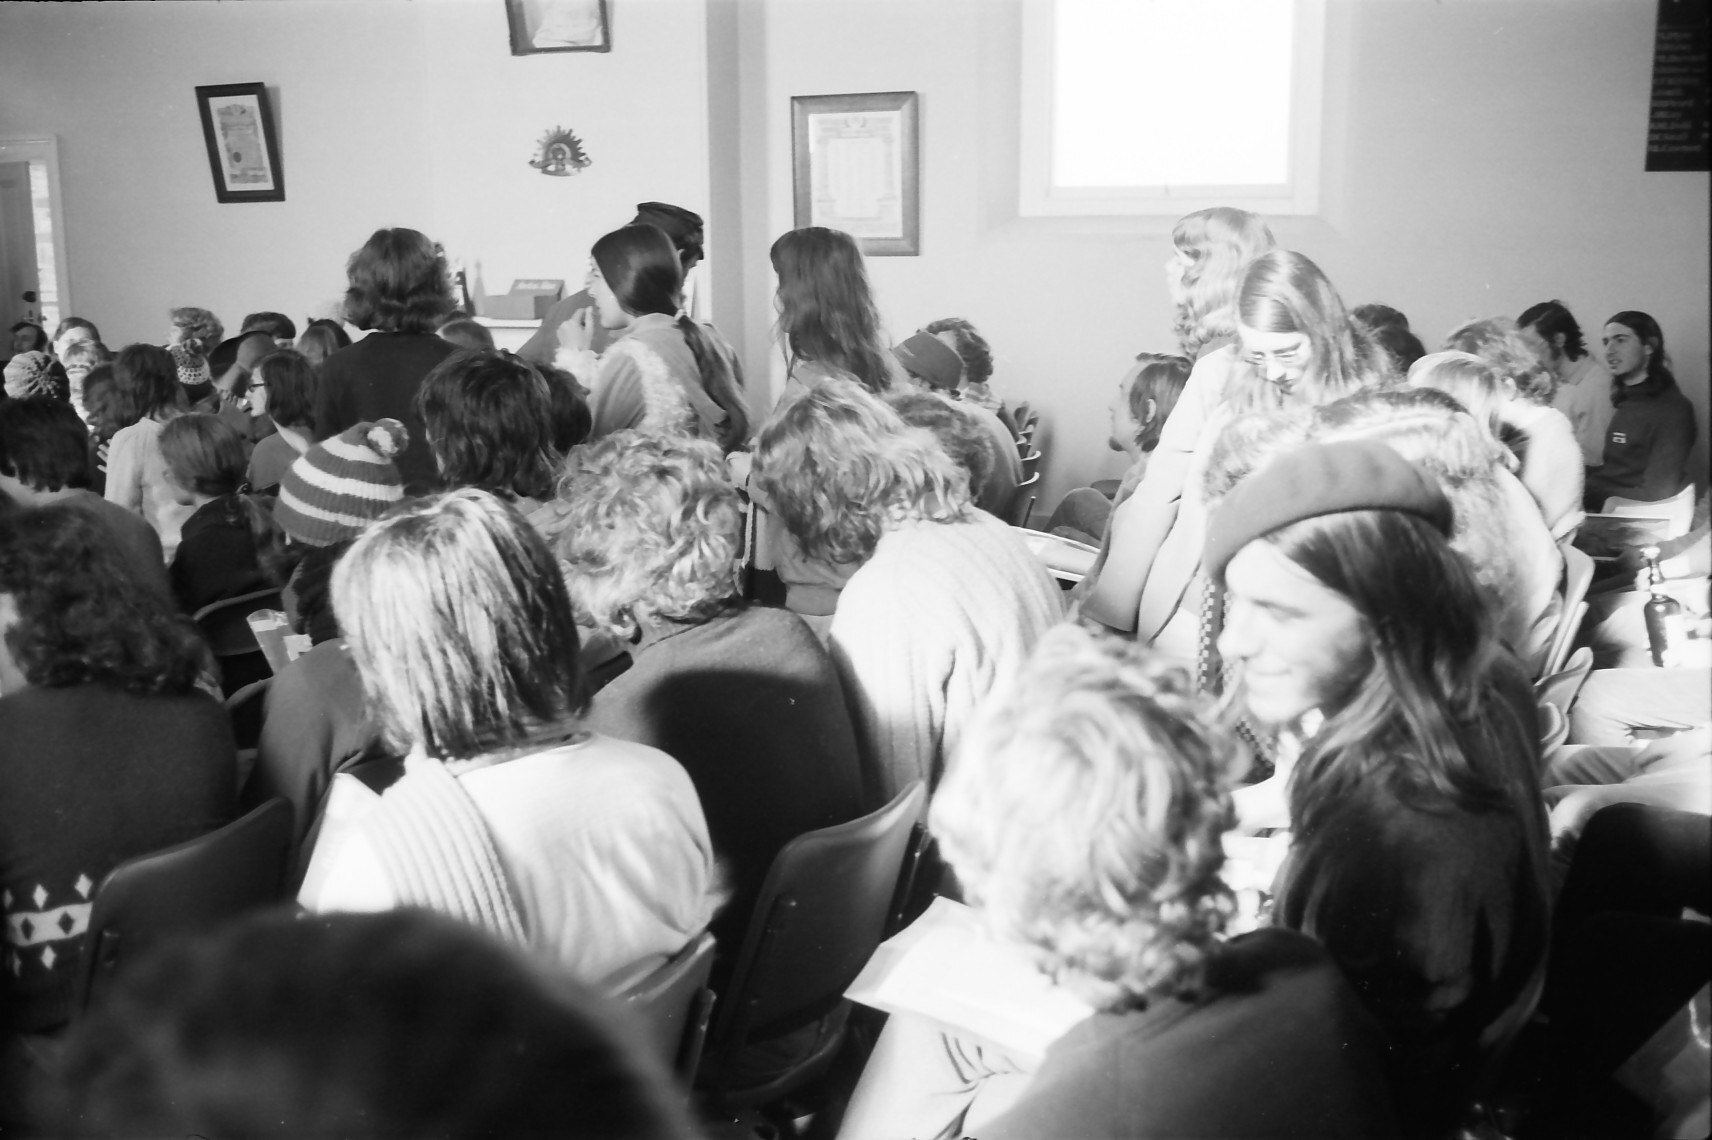 A black-and-white image of a previous camp rehearsal! We see people sitting in rows of chairs that are diagonal across the image. Near the front, somebody is smiling at their neighbour and likely chatting, but most people appear to be looking forwards. The walls of the room are a light colour, there are a few frames hanging on the wall, and we see the room's window in the top-right quadrant of the image.